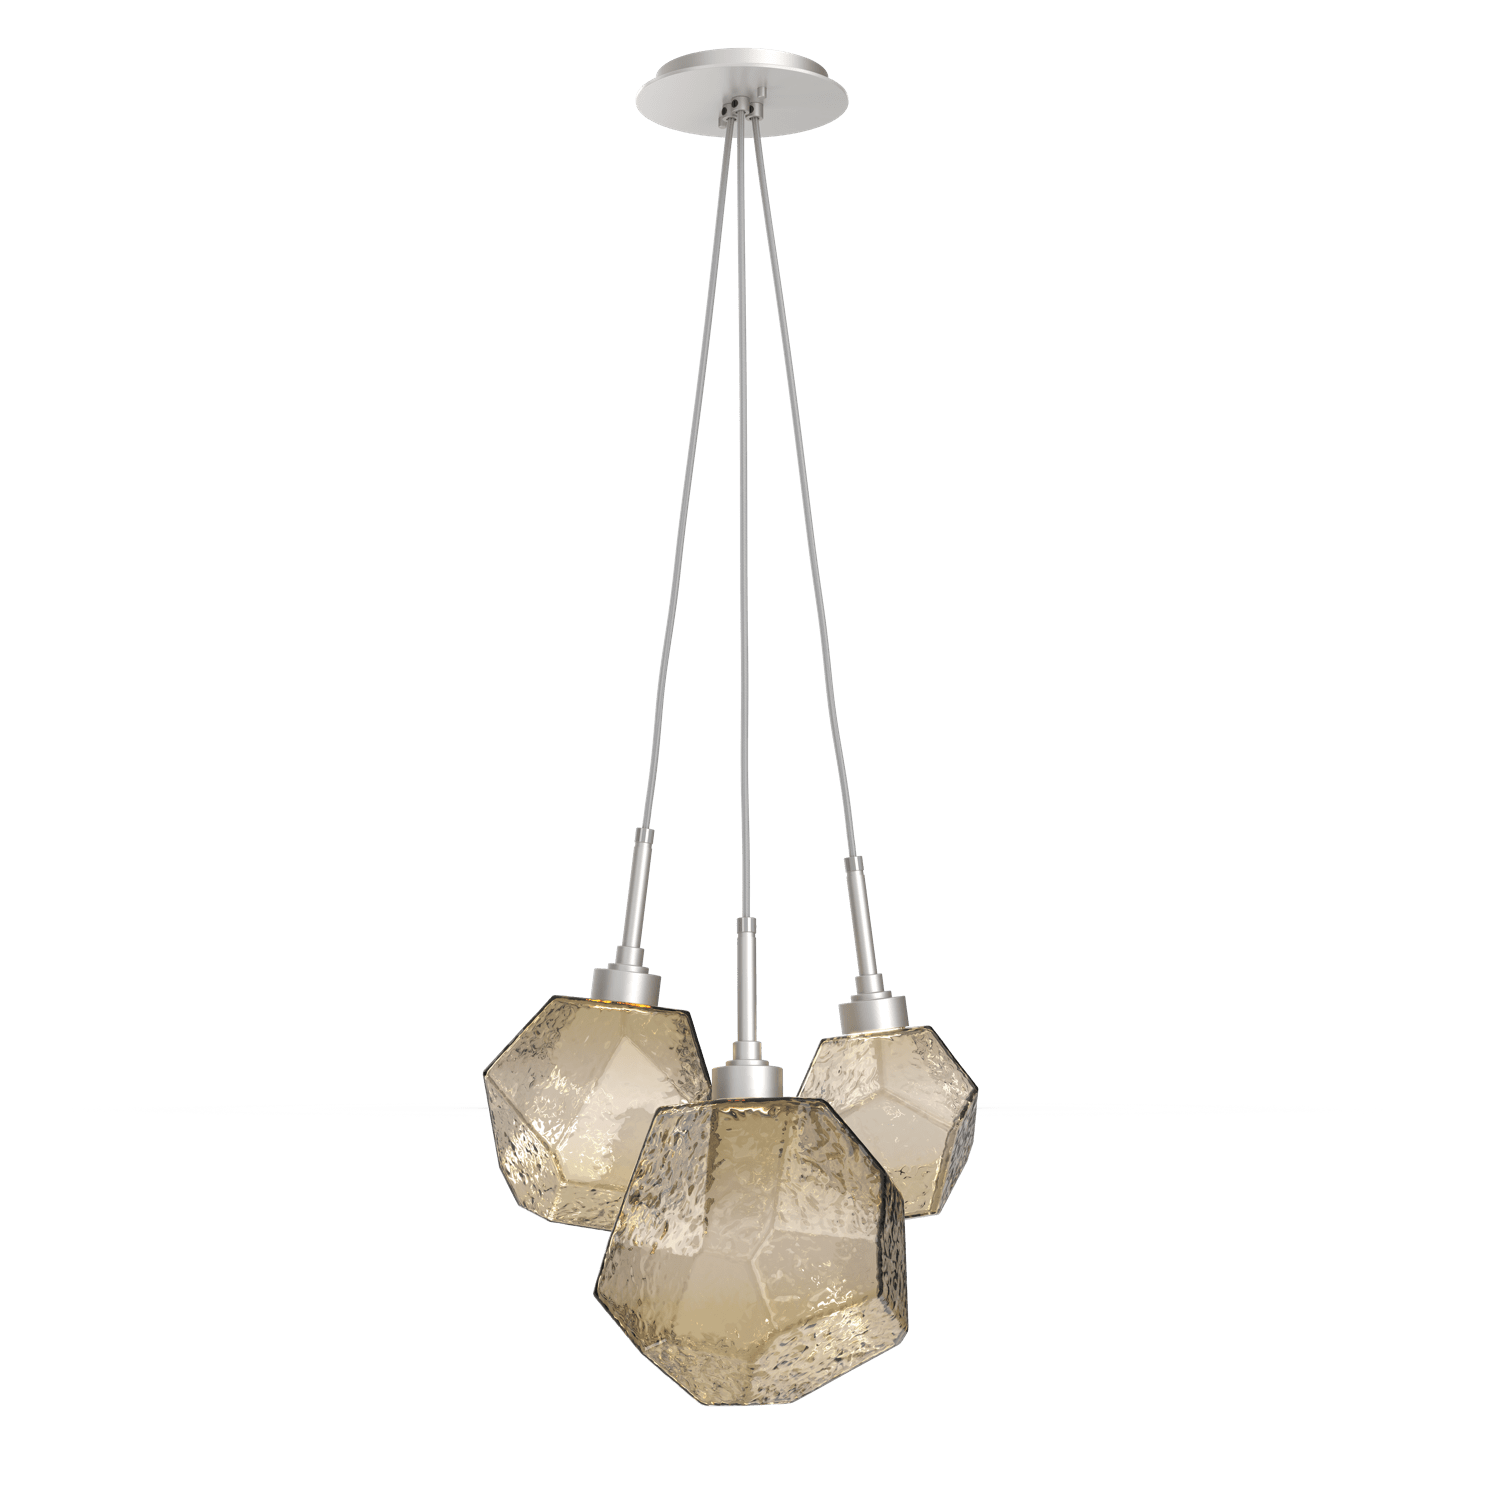 CHB0039-0E-BS-B-Hammerton-Studio-Gem-3-light-cluster-pendant-light-with-metallic-beige-silver-finish-and-bronze-blown-glass-shades-and-LED-lamping